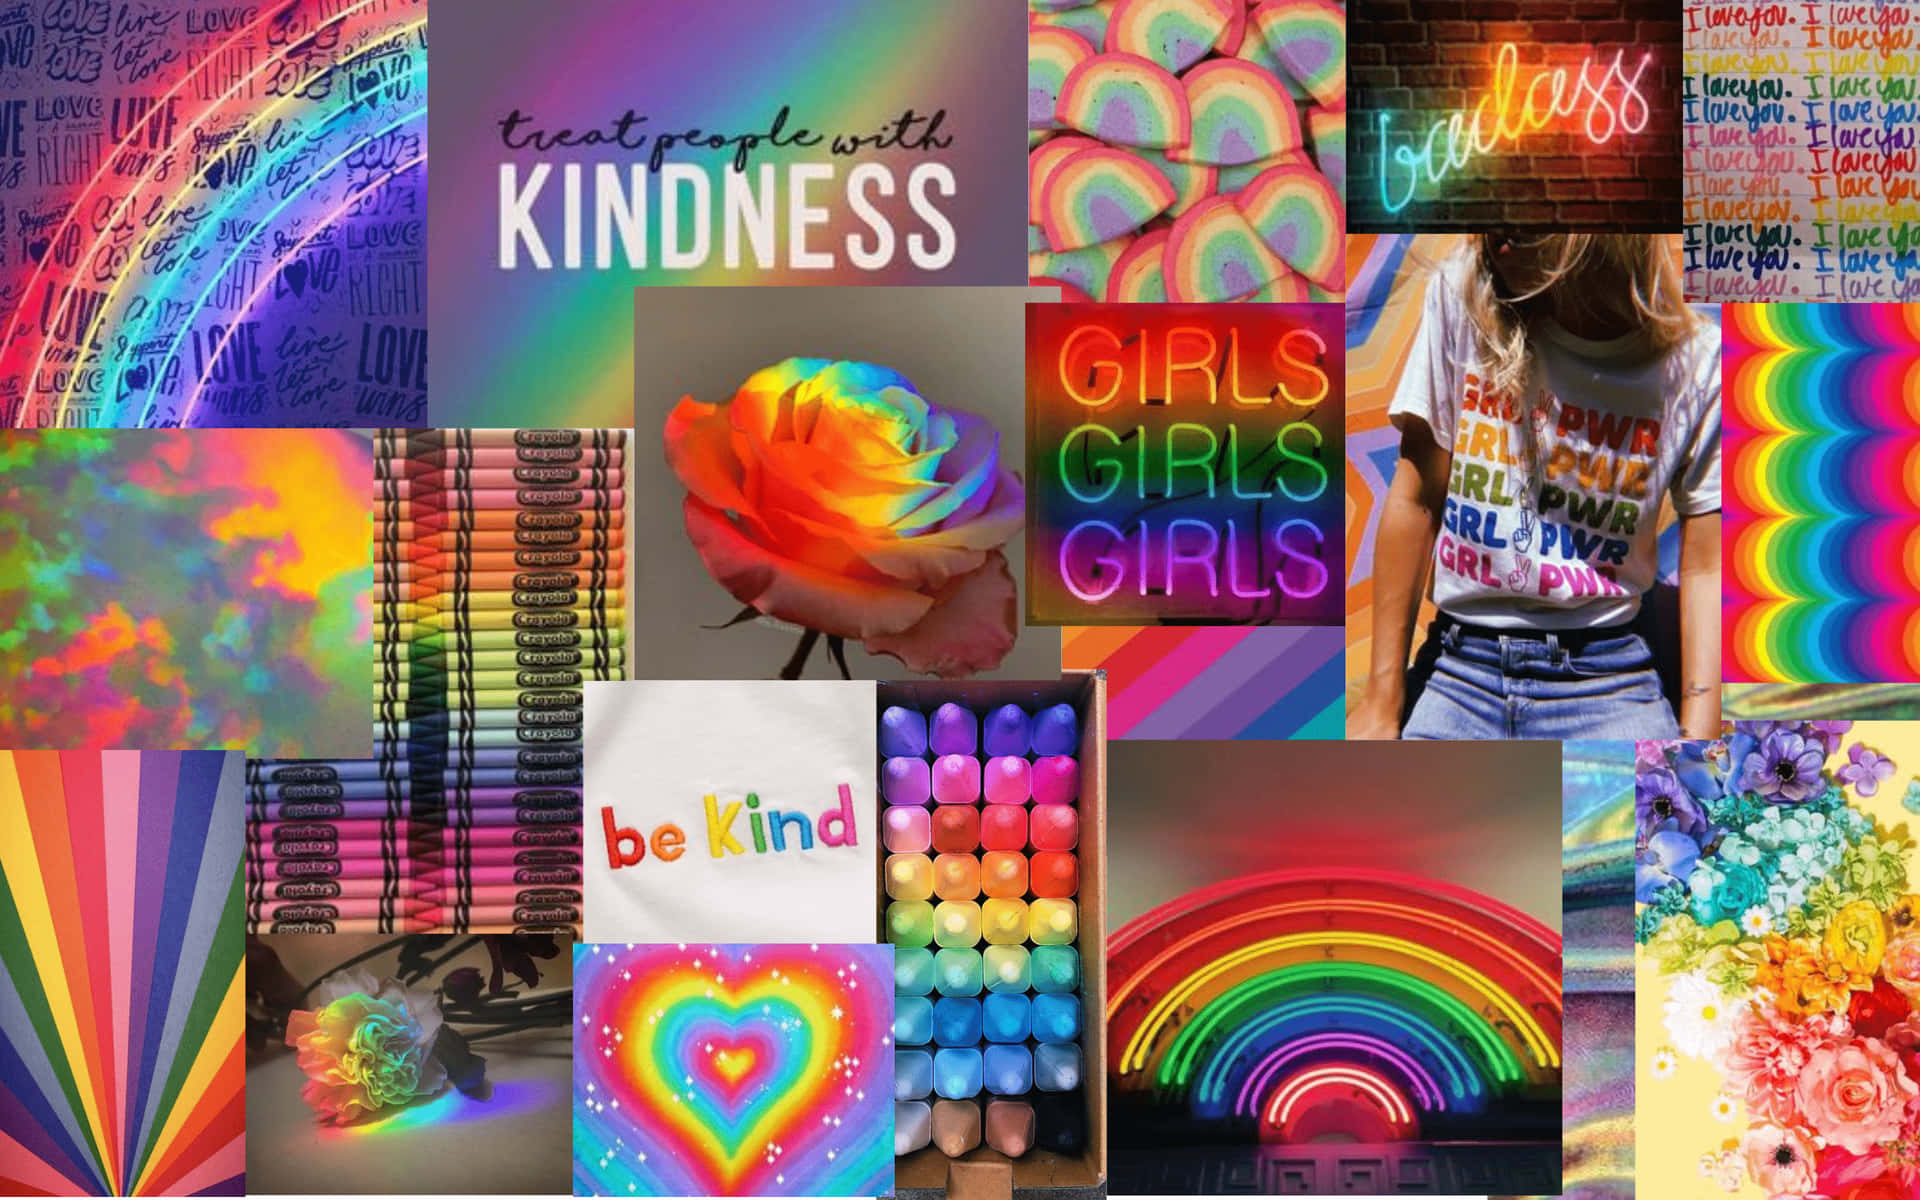 67 Rainbow Aesthetic Wallpapers HD 4K 5K for PC and Mobile  Download  free images for iPhone Android